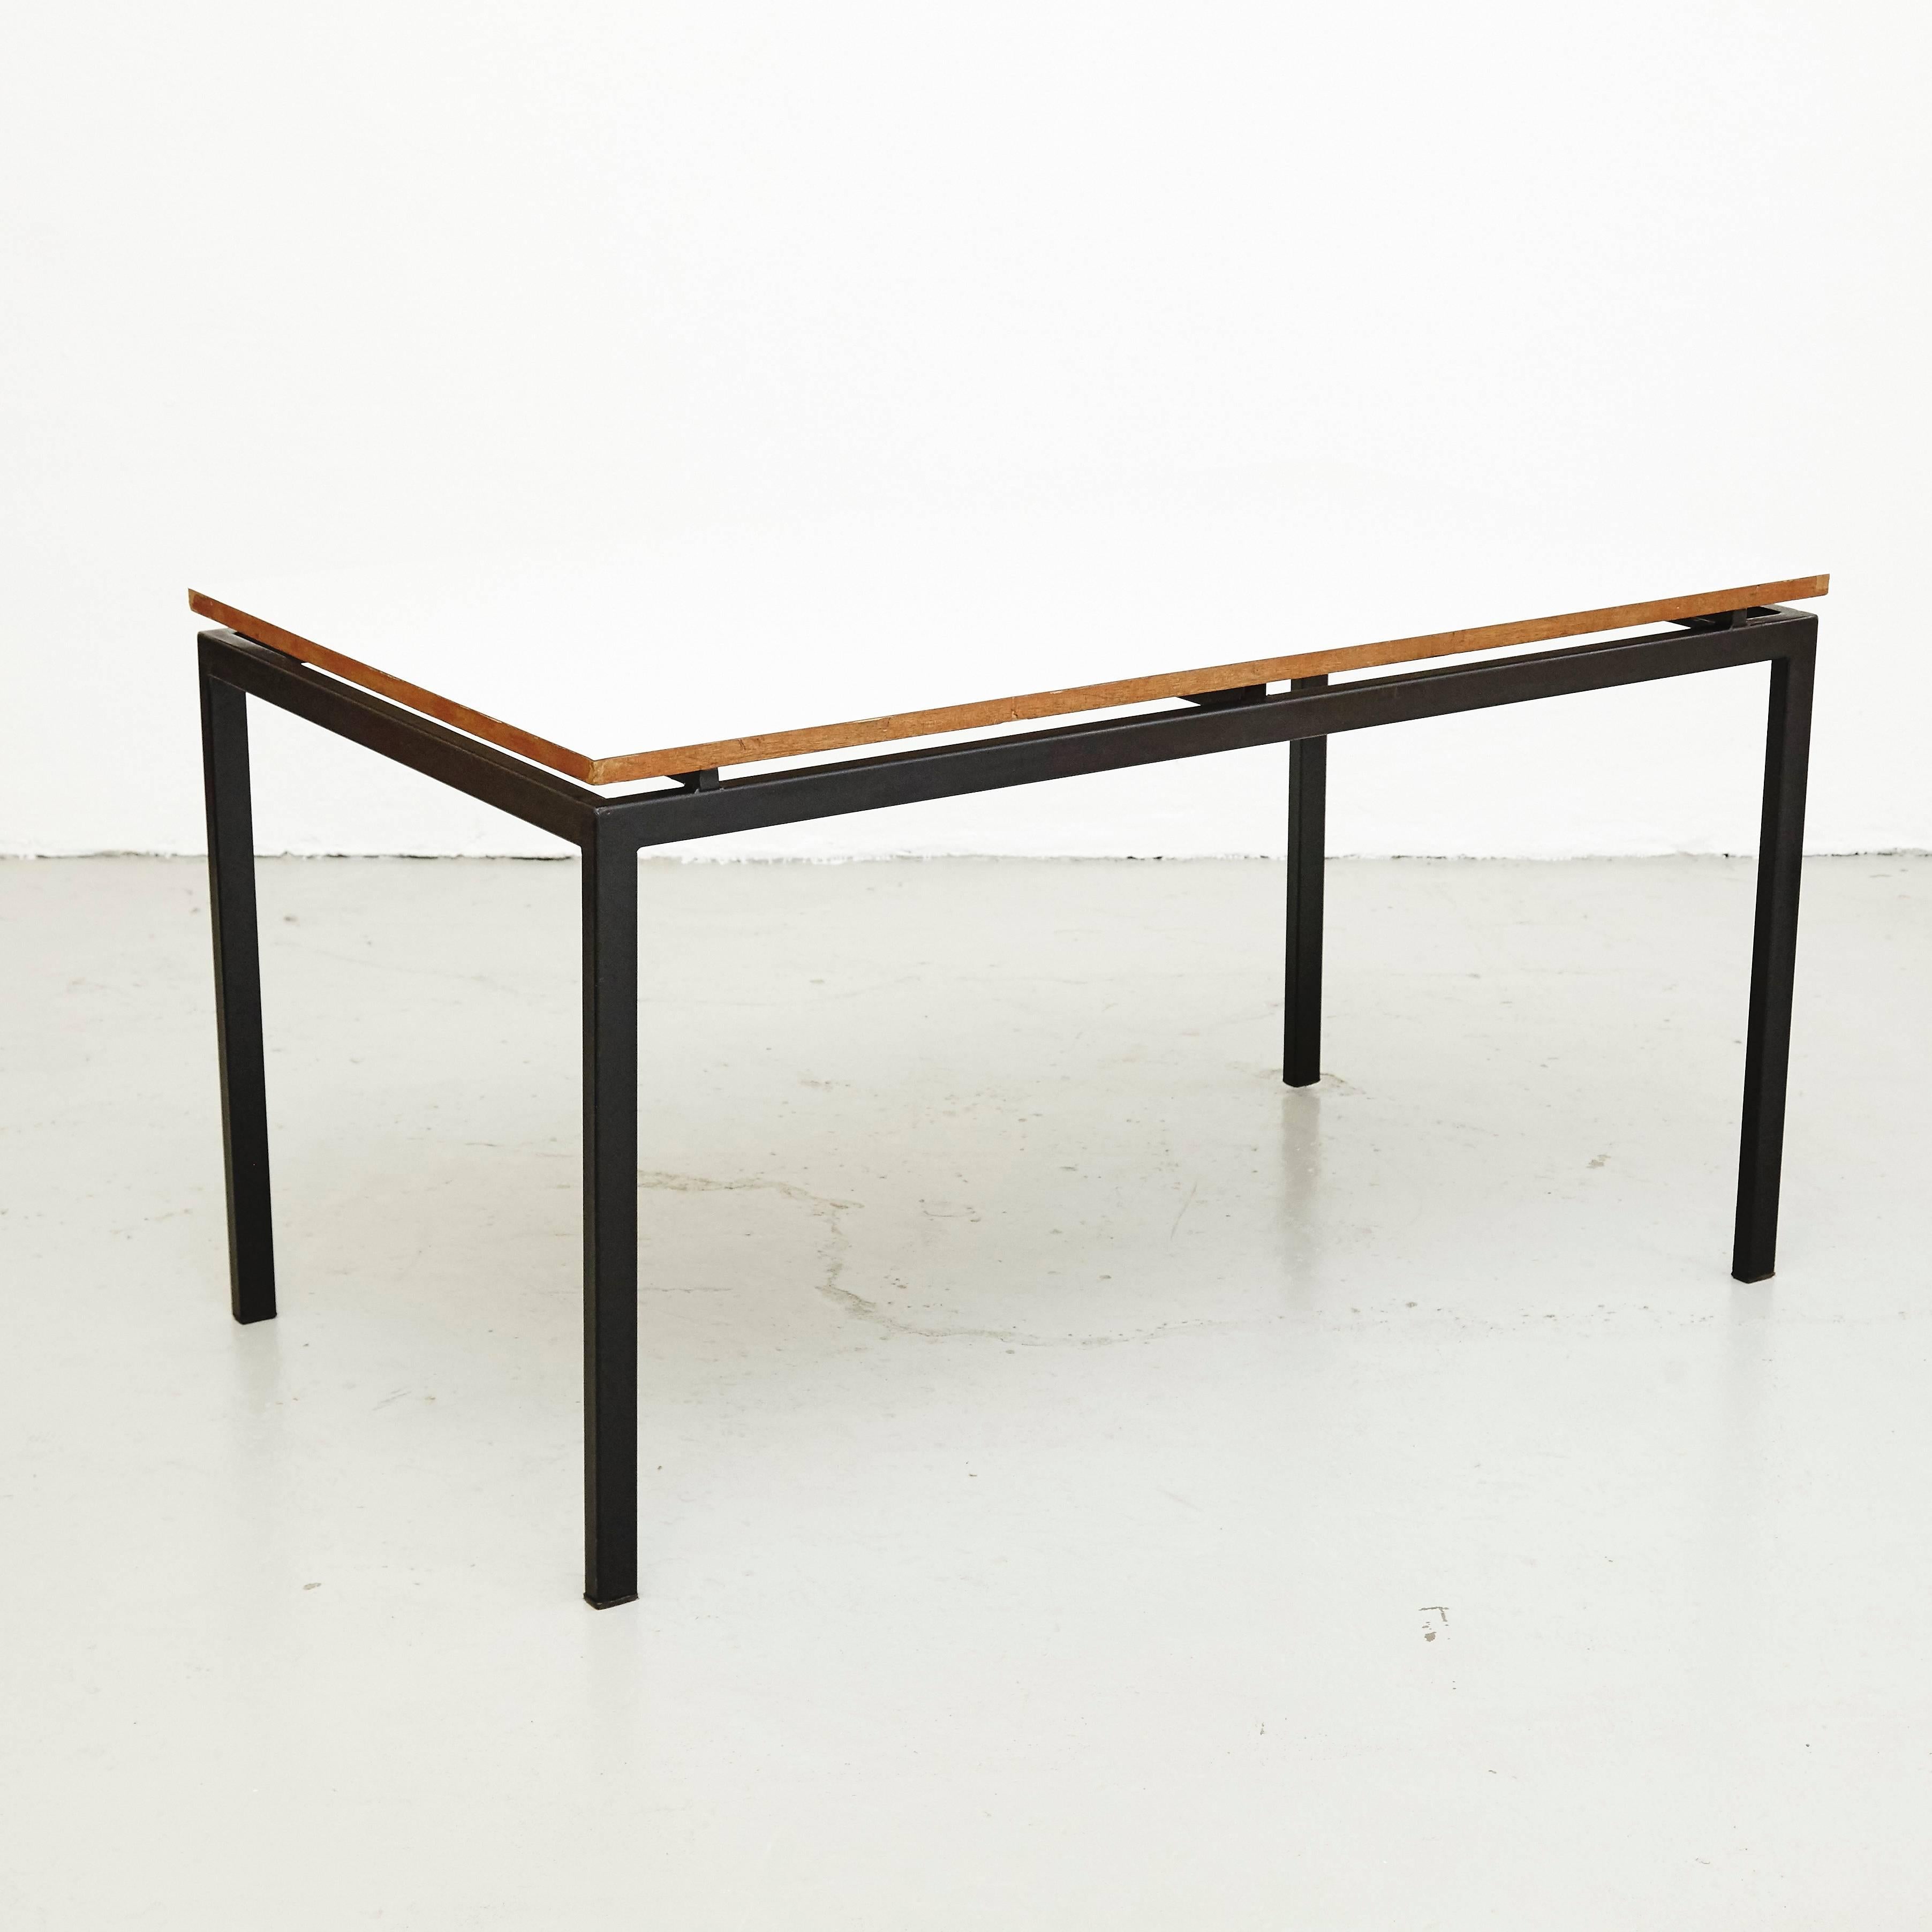 Table designed by Charlotte Perriand, circa 1950.

Wood, metal frame legs.

Provenance: Cansado, Mauritania (Africa).

In good condition, with minor wear consistent with age and use, preserving a beautiful patina.

Charlotte Perriand